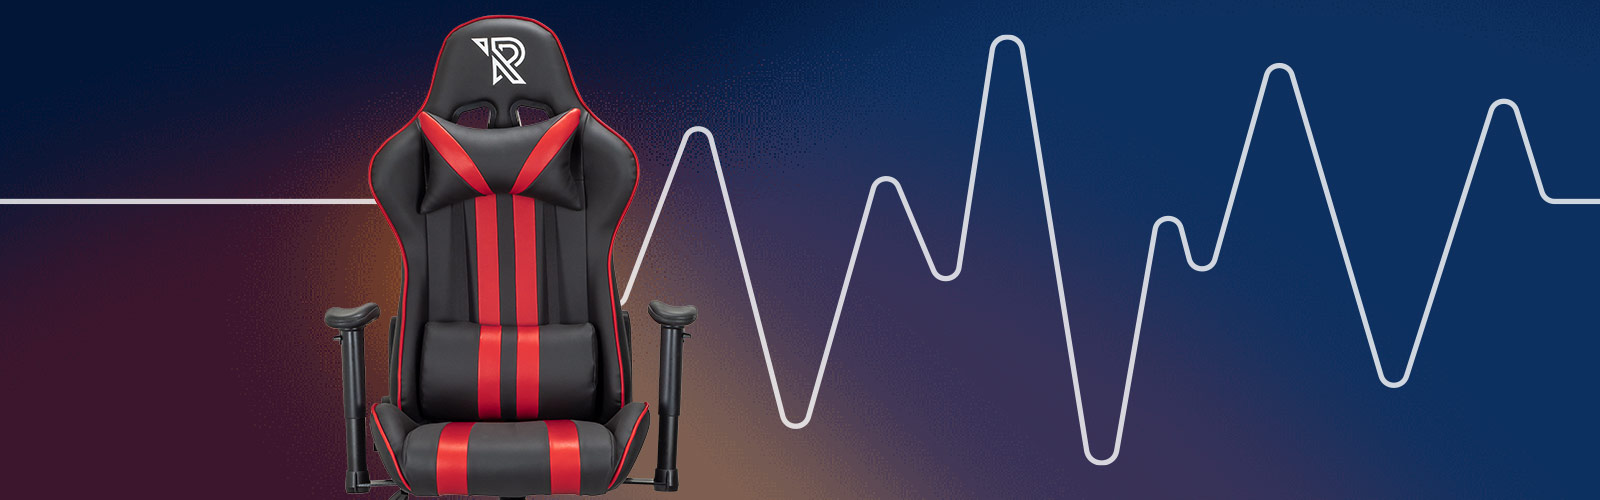 Ma chaise gaming grince, que dois-je faire ?